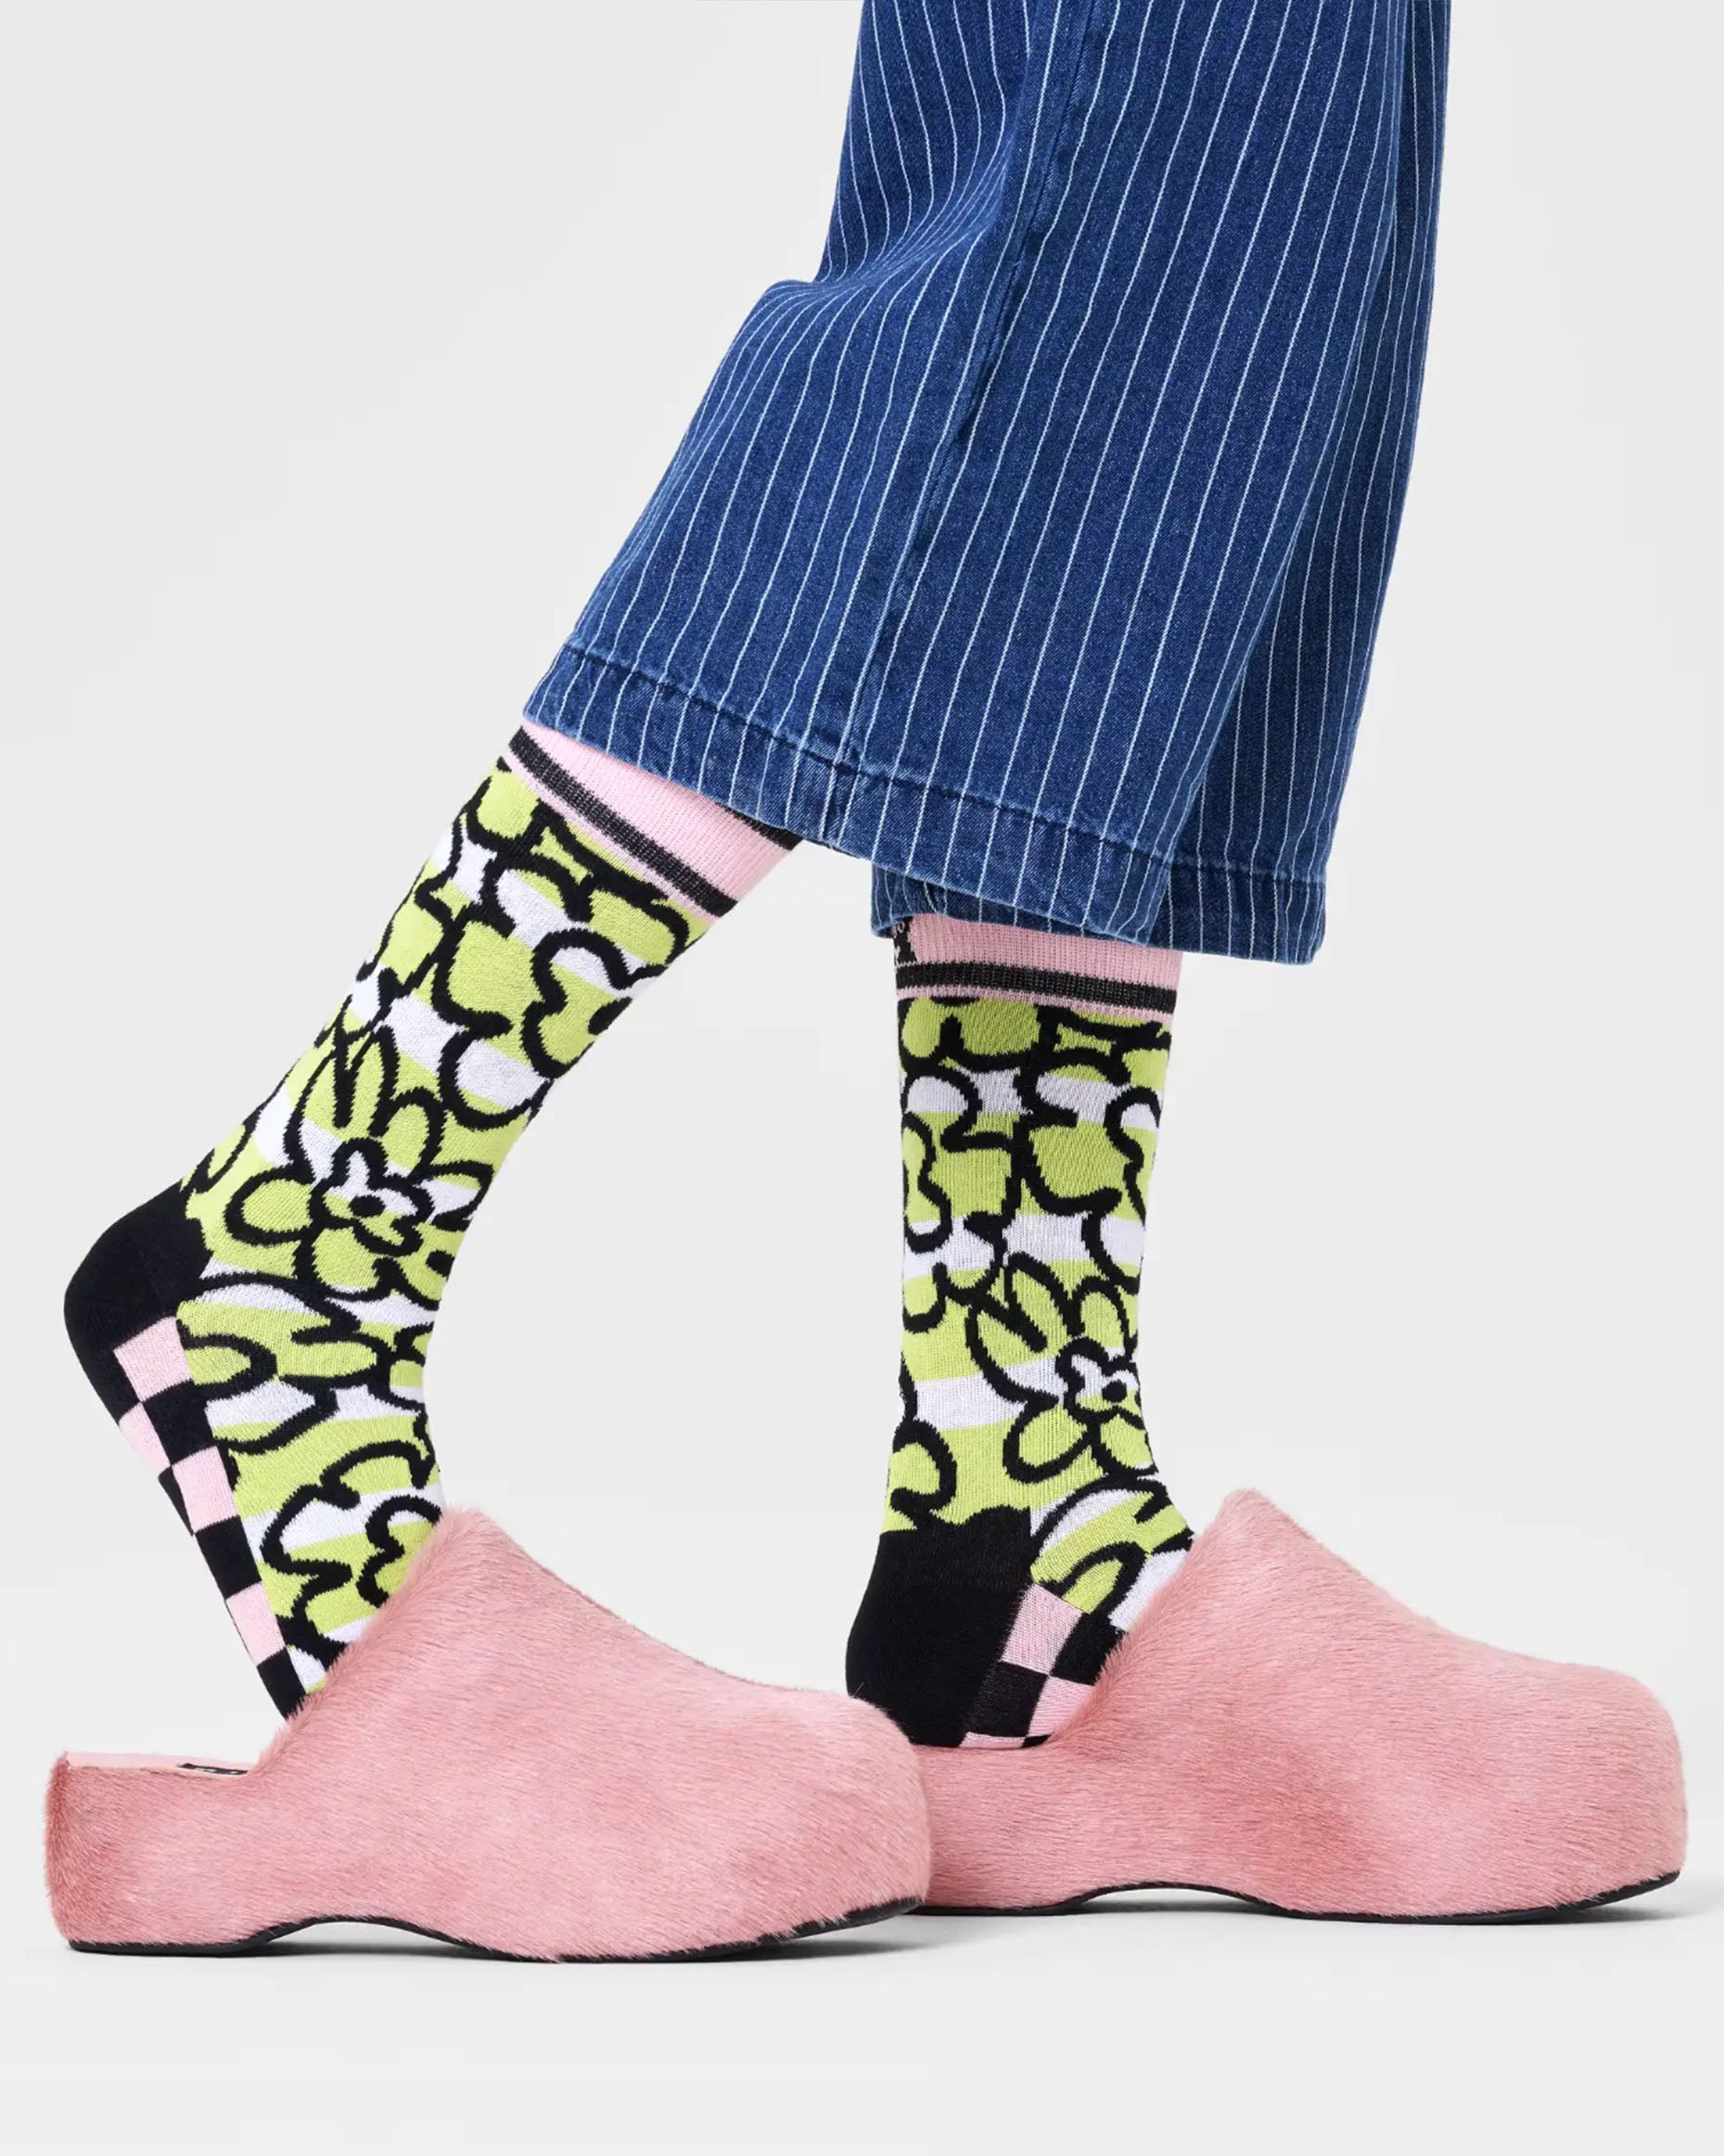 Lime green and white horizontal stripe cotton crew length ankle socks with black outlined flower pattern, black and pink checkerboard pattern sole, pink cuff with black stripe edge and black toe and heel. Worn with fur clogs and denim pinstripe cropped pants.